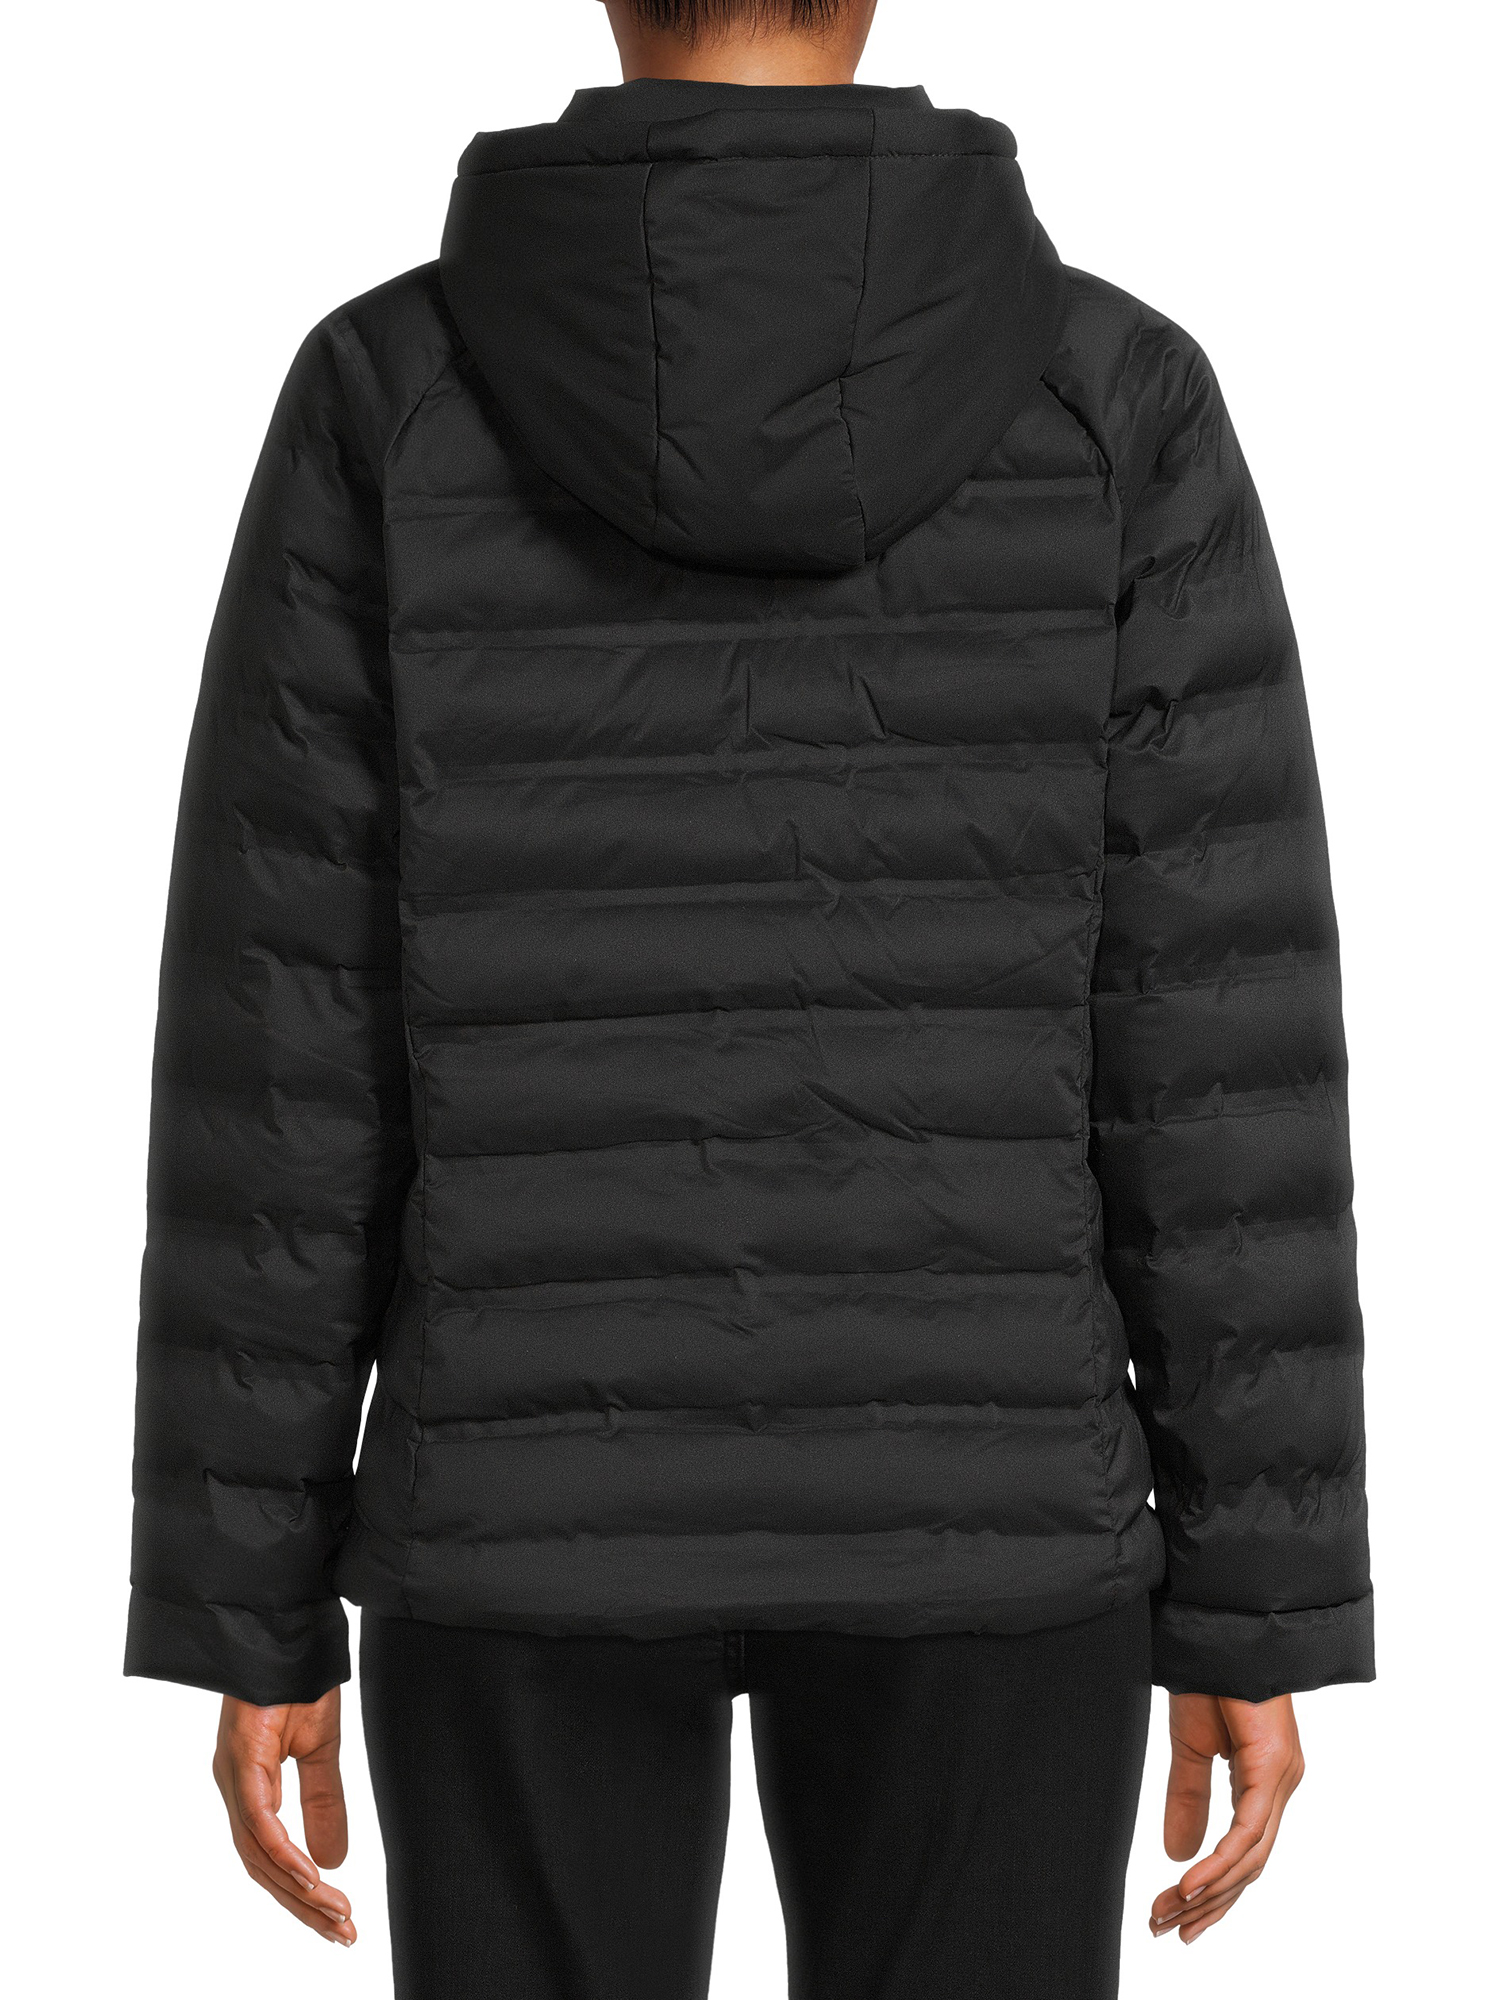 Time and Tru Women's and Plus Packable Stretch Zip Up Puffer Jacket - image 3 of 5